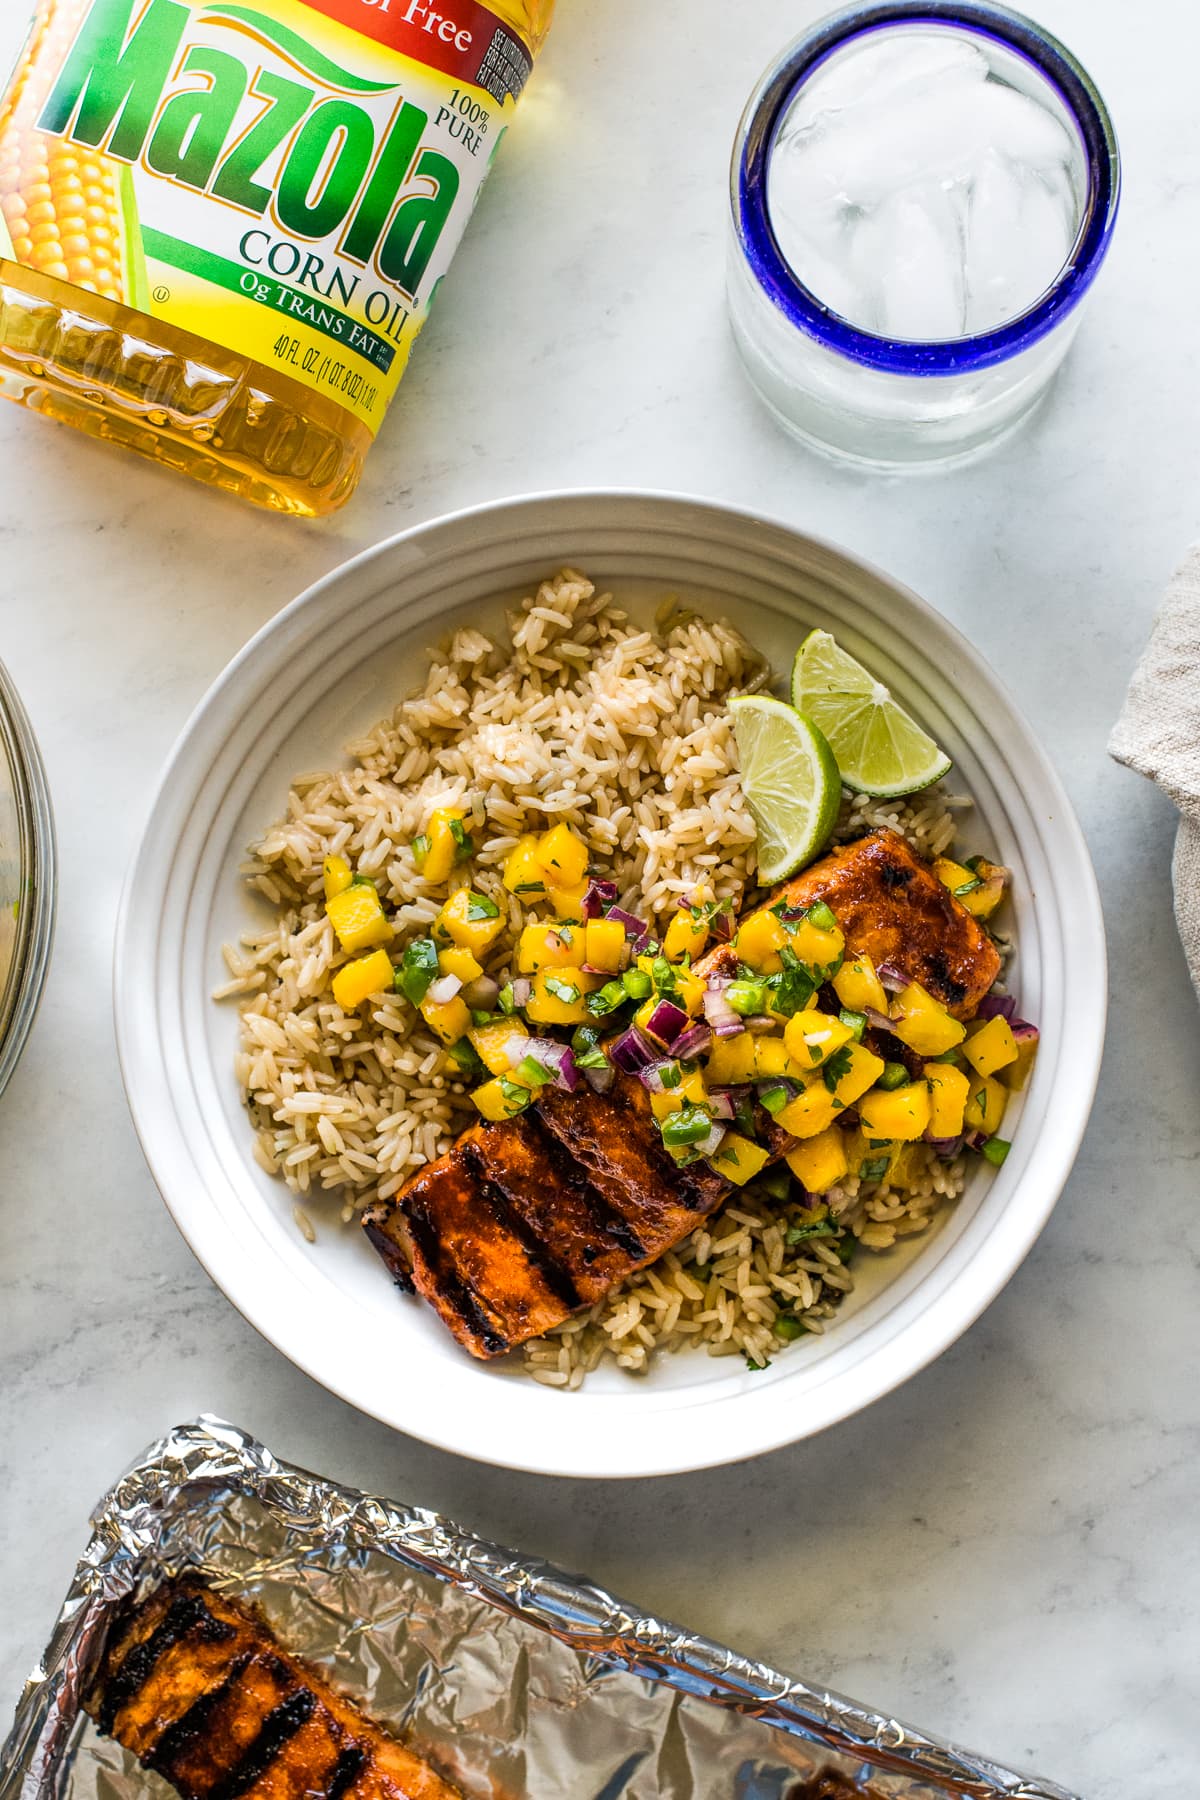 Grilled salmon served with rice and mango salsa.